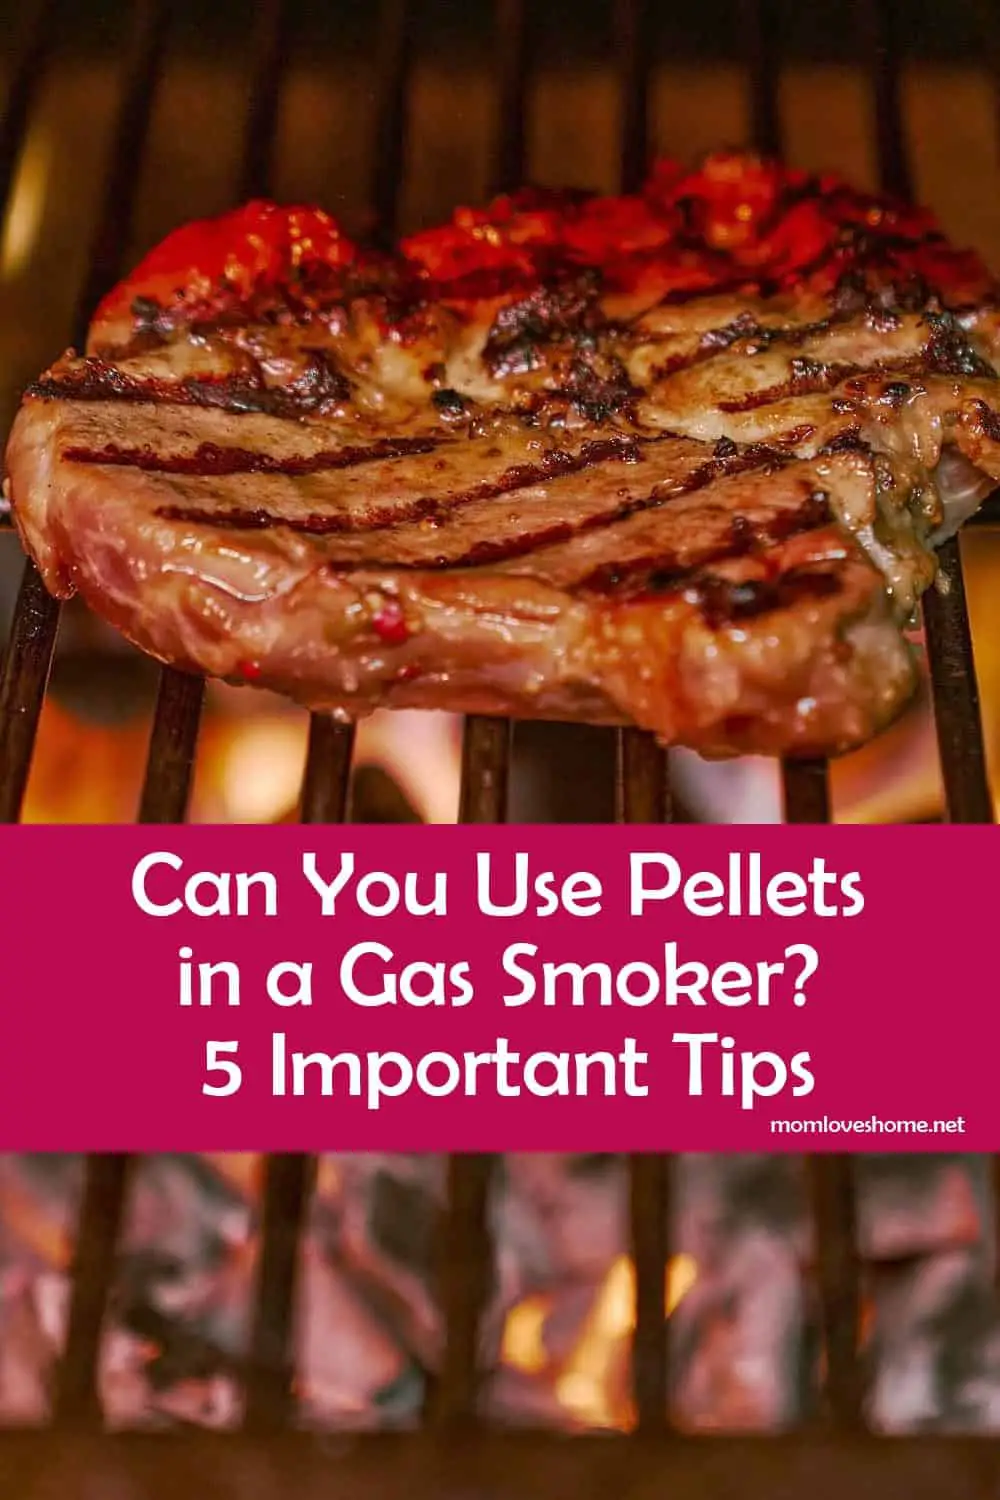 Can You Use Pellets in a Gas Smoker